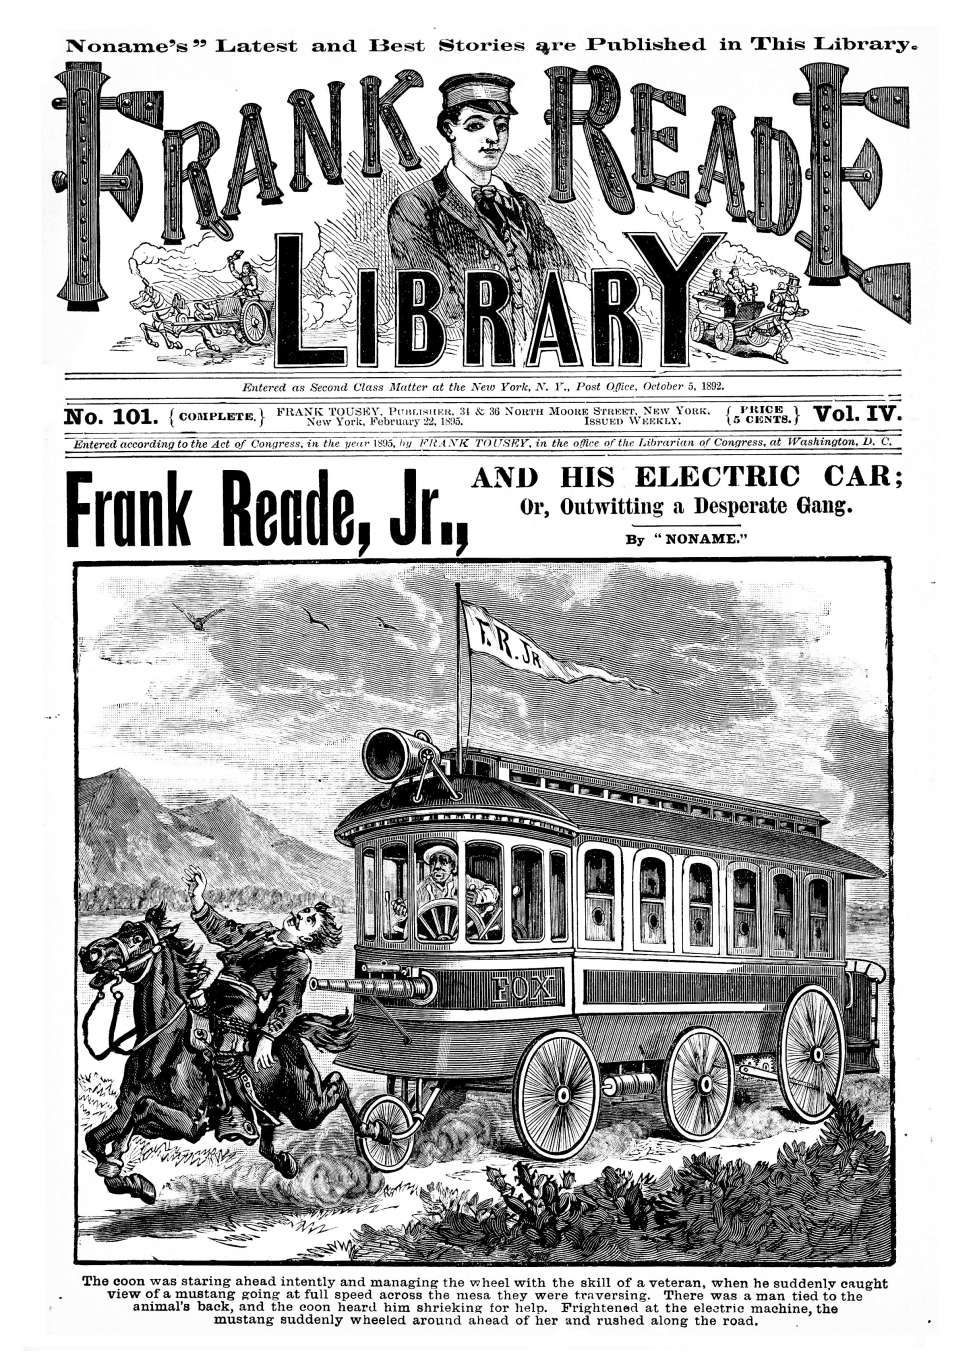 Comic Book Cover For v04 101 - Frank Reade Jr., and His Electric Car